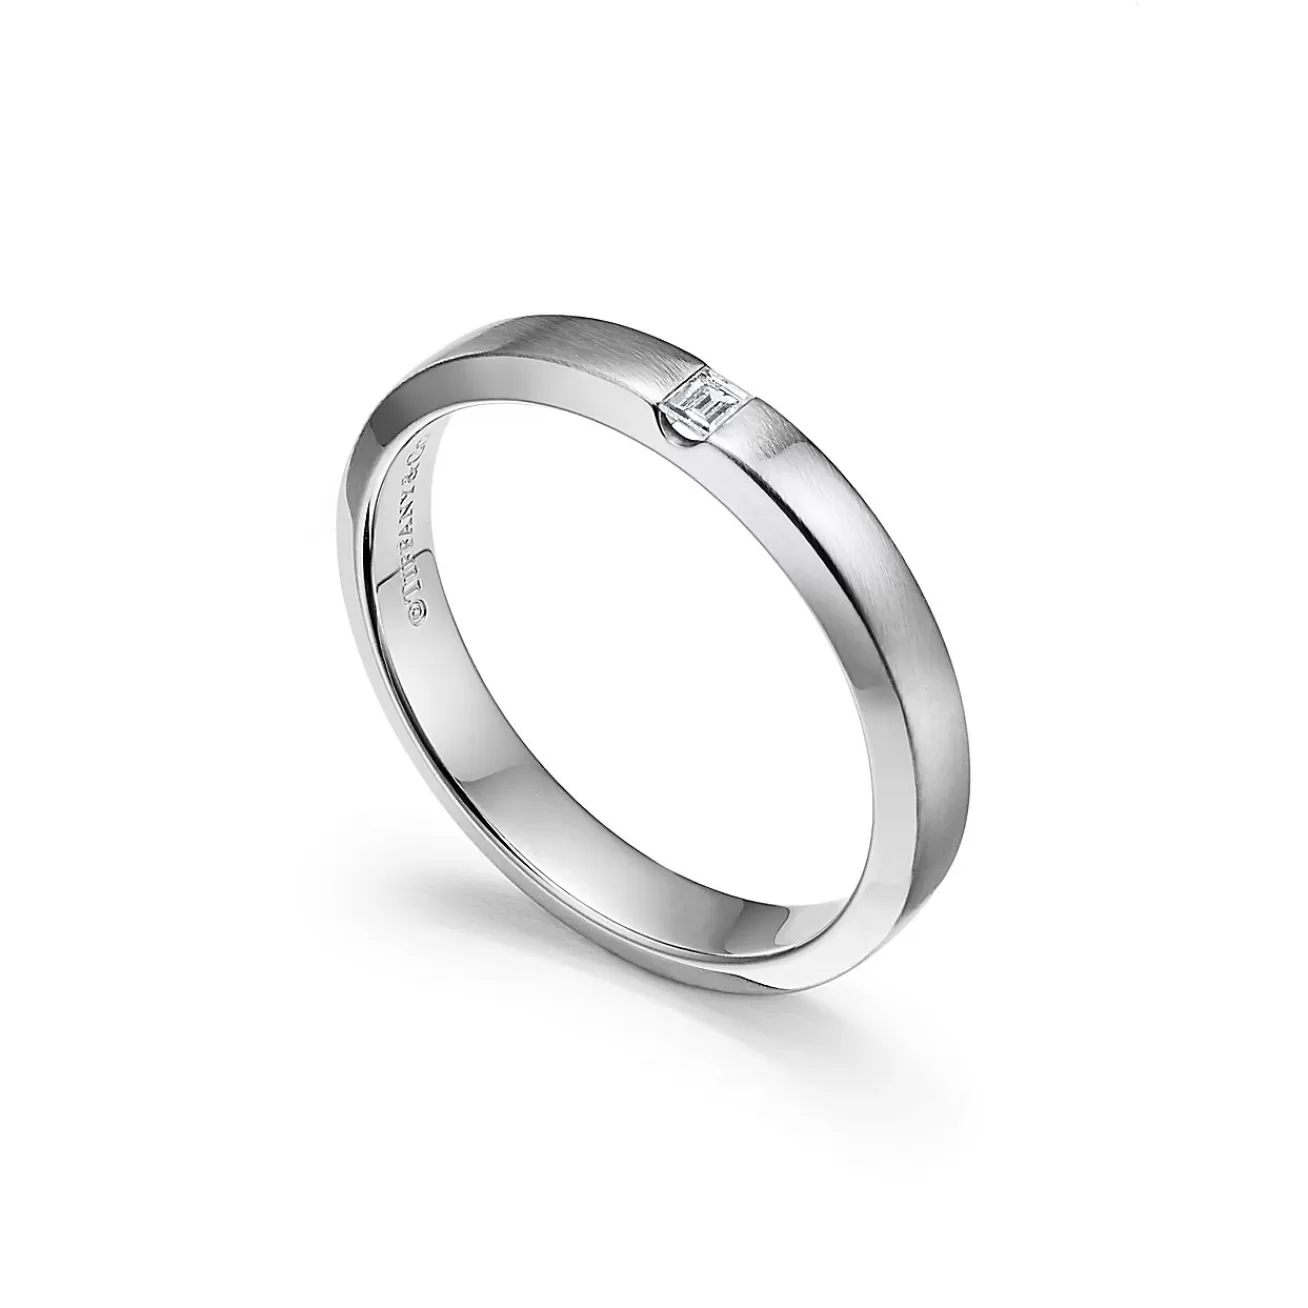 Tiffany & Co. The Charles Tiffany Setting Satin Finish Ring in Platinum with a Diamond, 3 mm | ^Women Rings | Men's Jewelry